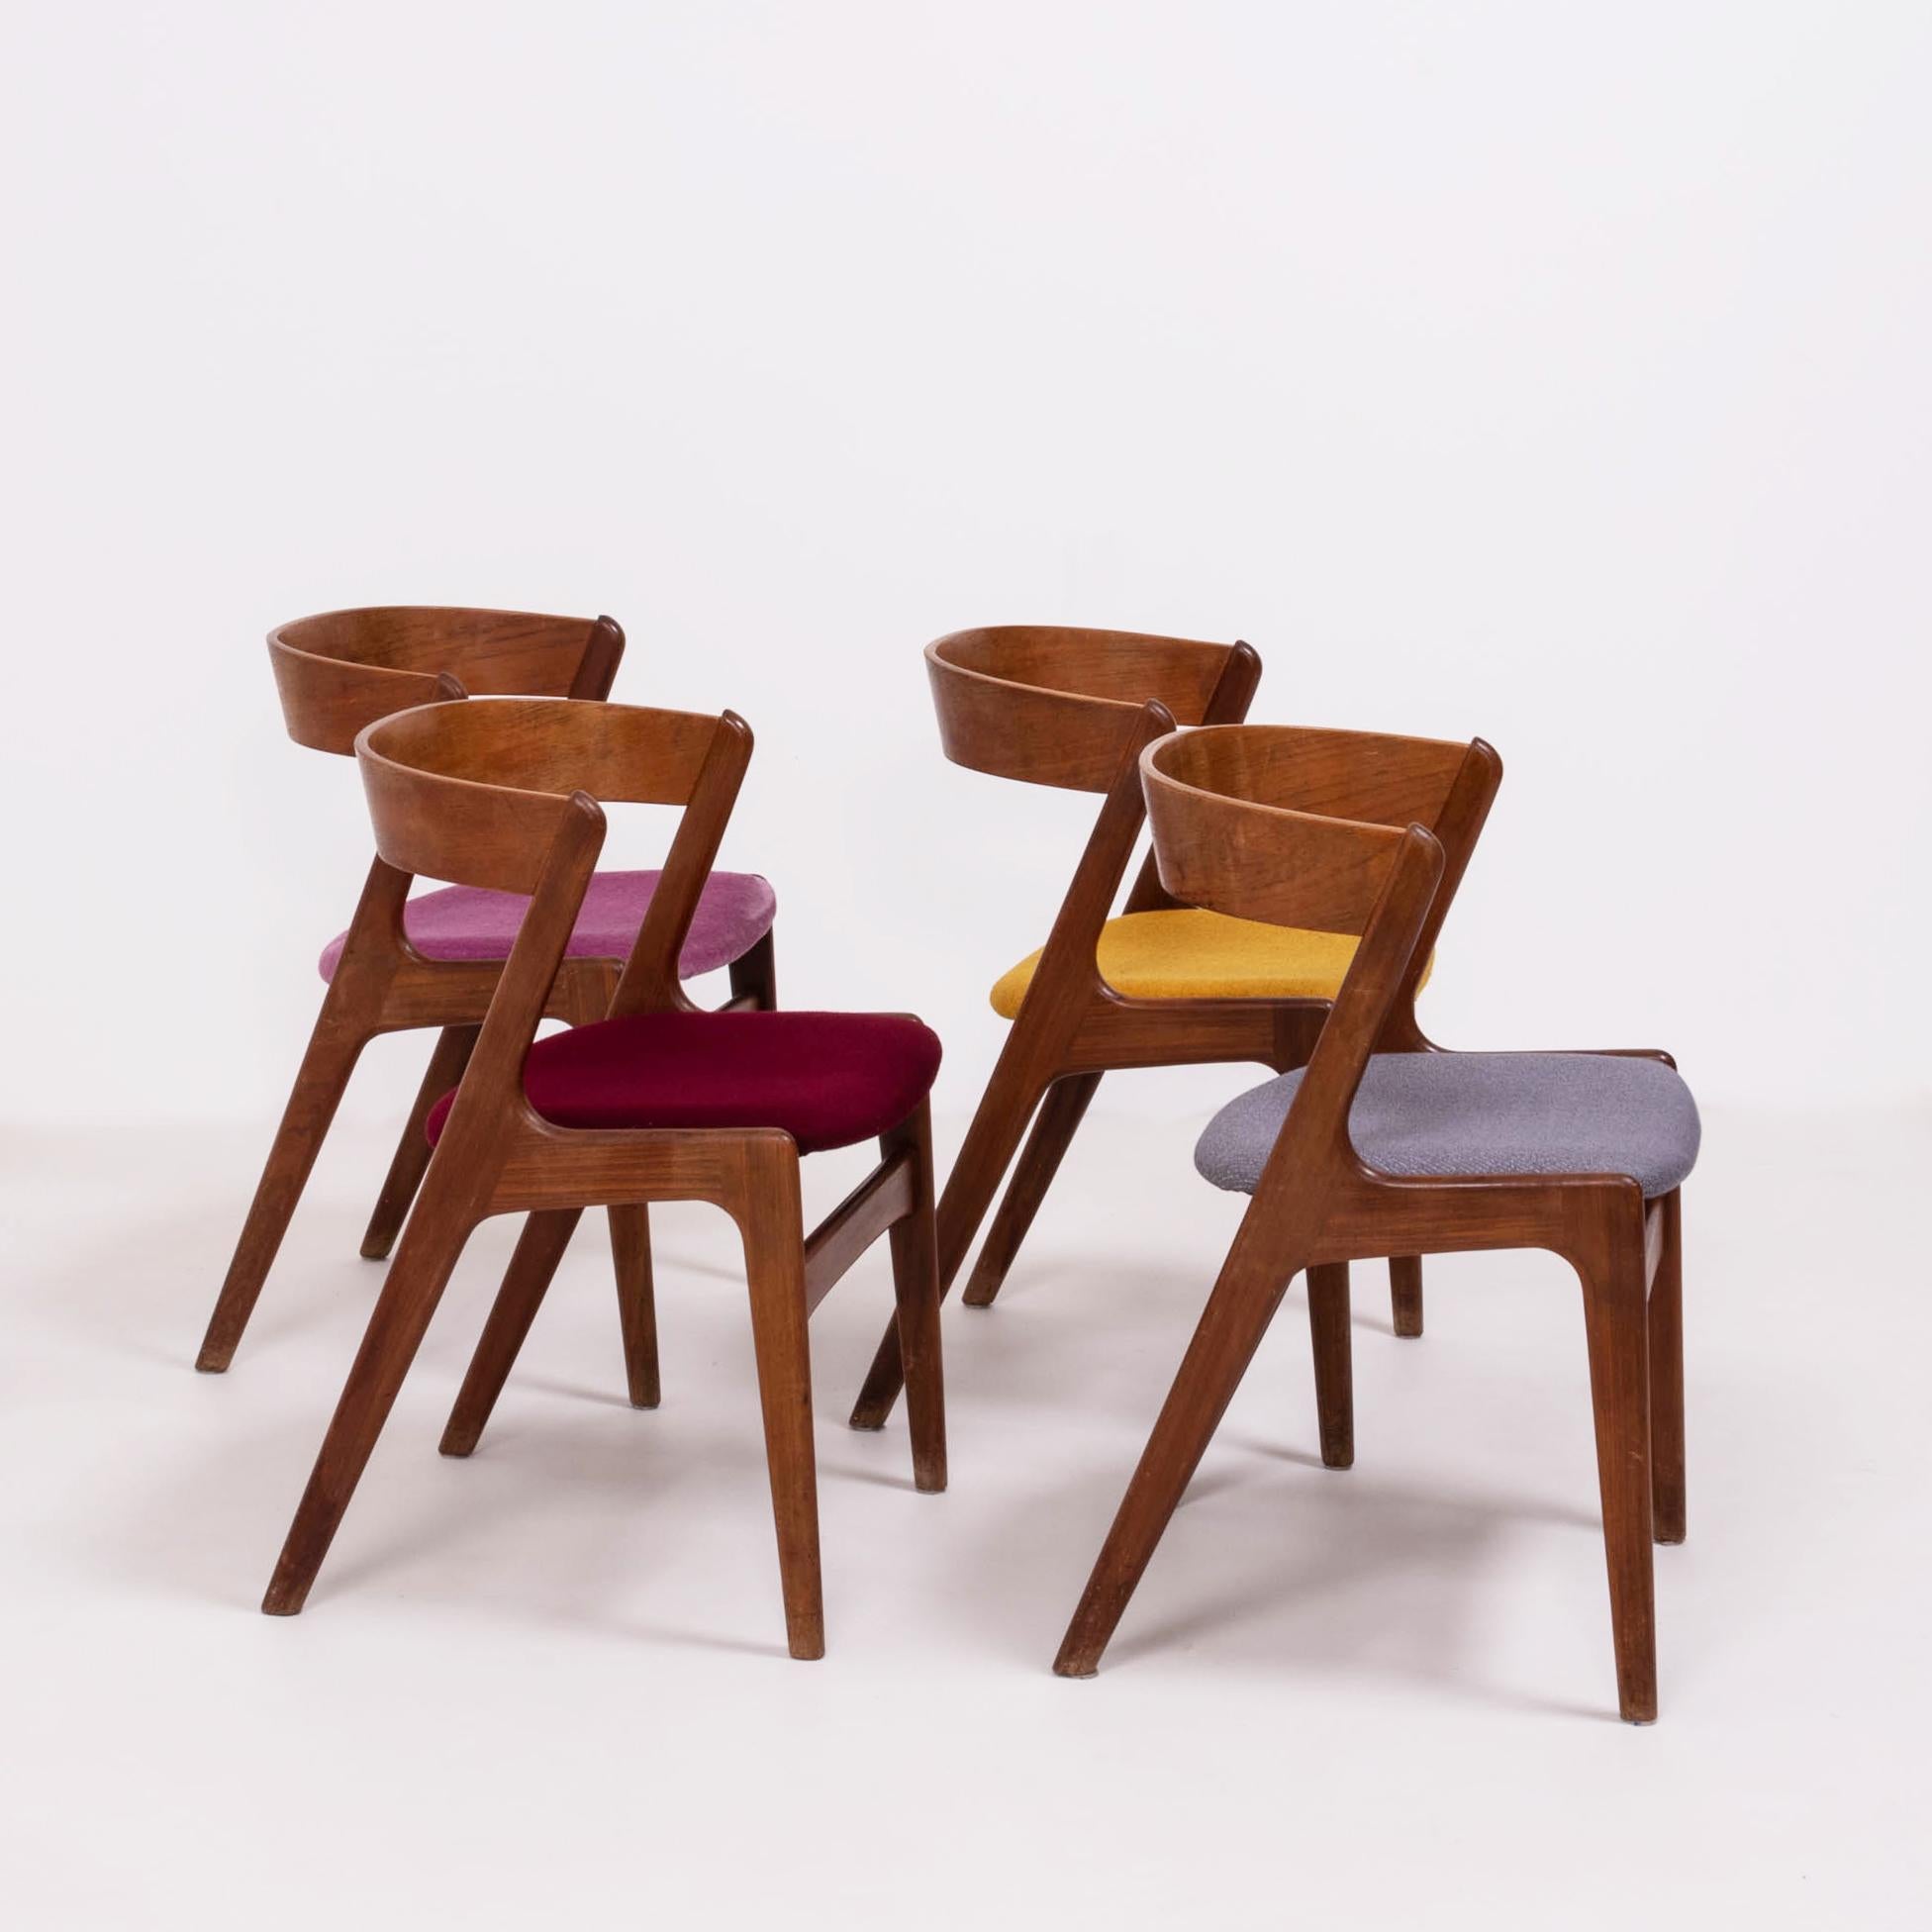 Exemplifying Mid-Century Modern design, this set of four T21 fire chairs designed by Korup combine sleek curves with angular lines to create an iconic silhouette.

Constructed with solid teak wood bases, the chairs have curved wooden backrests and